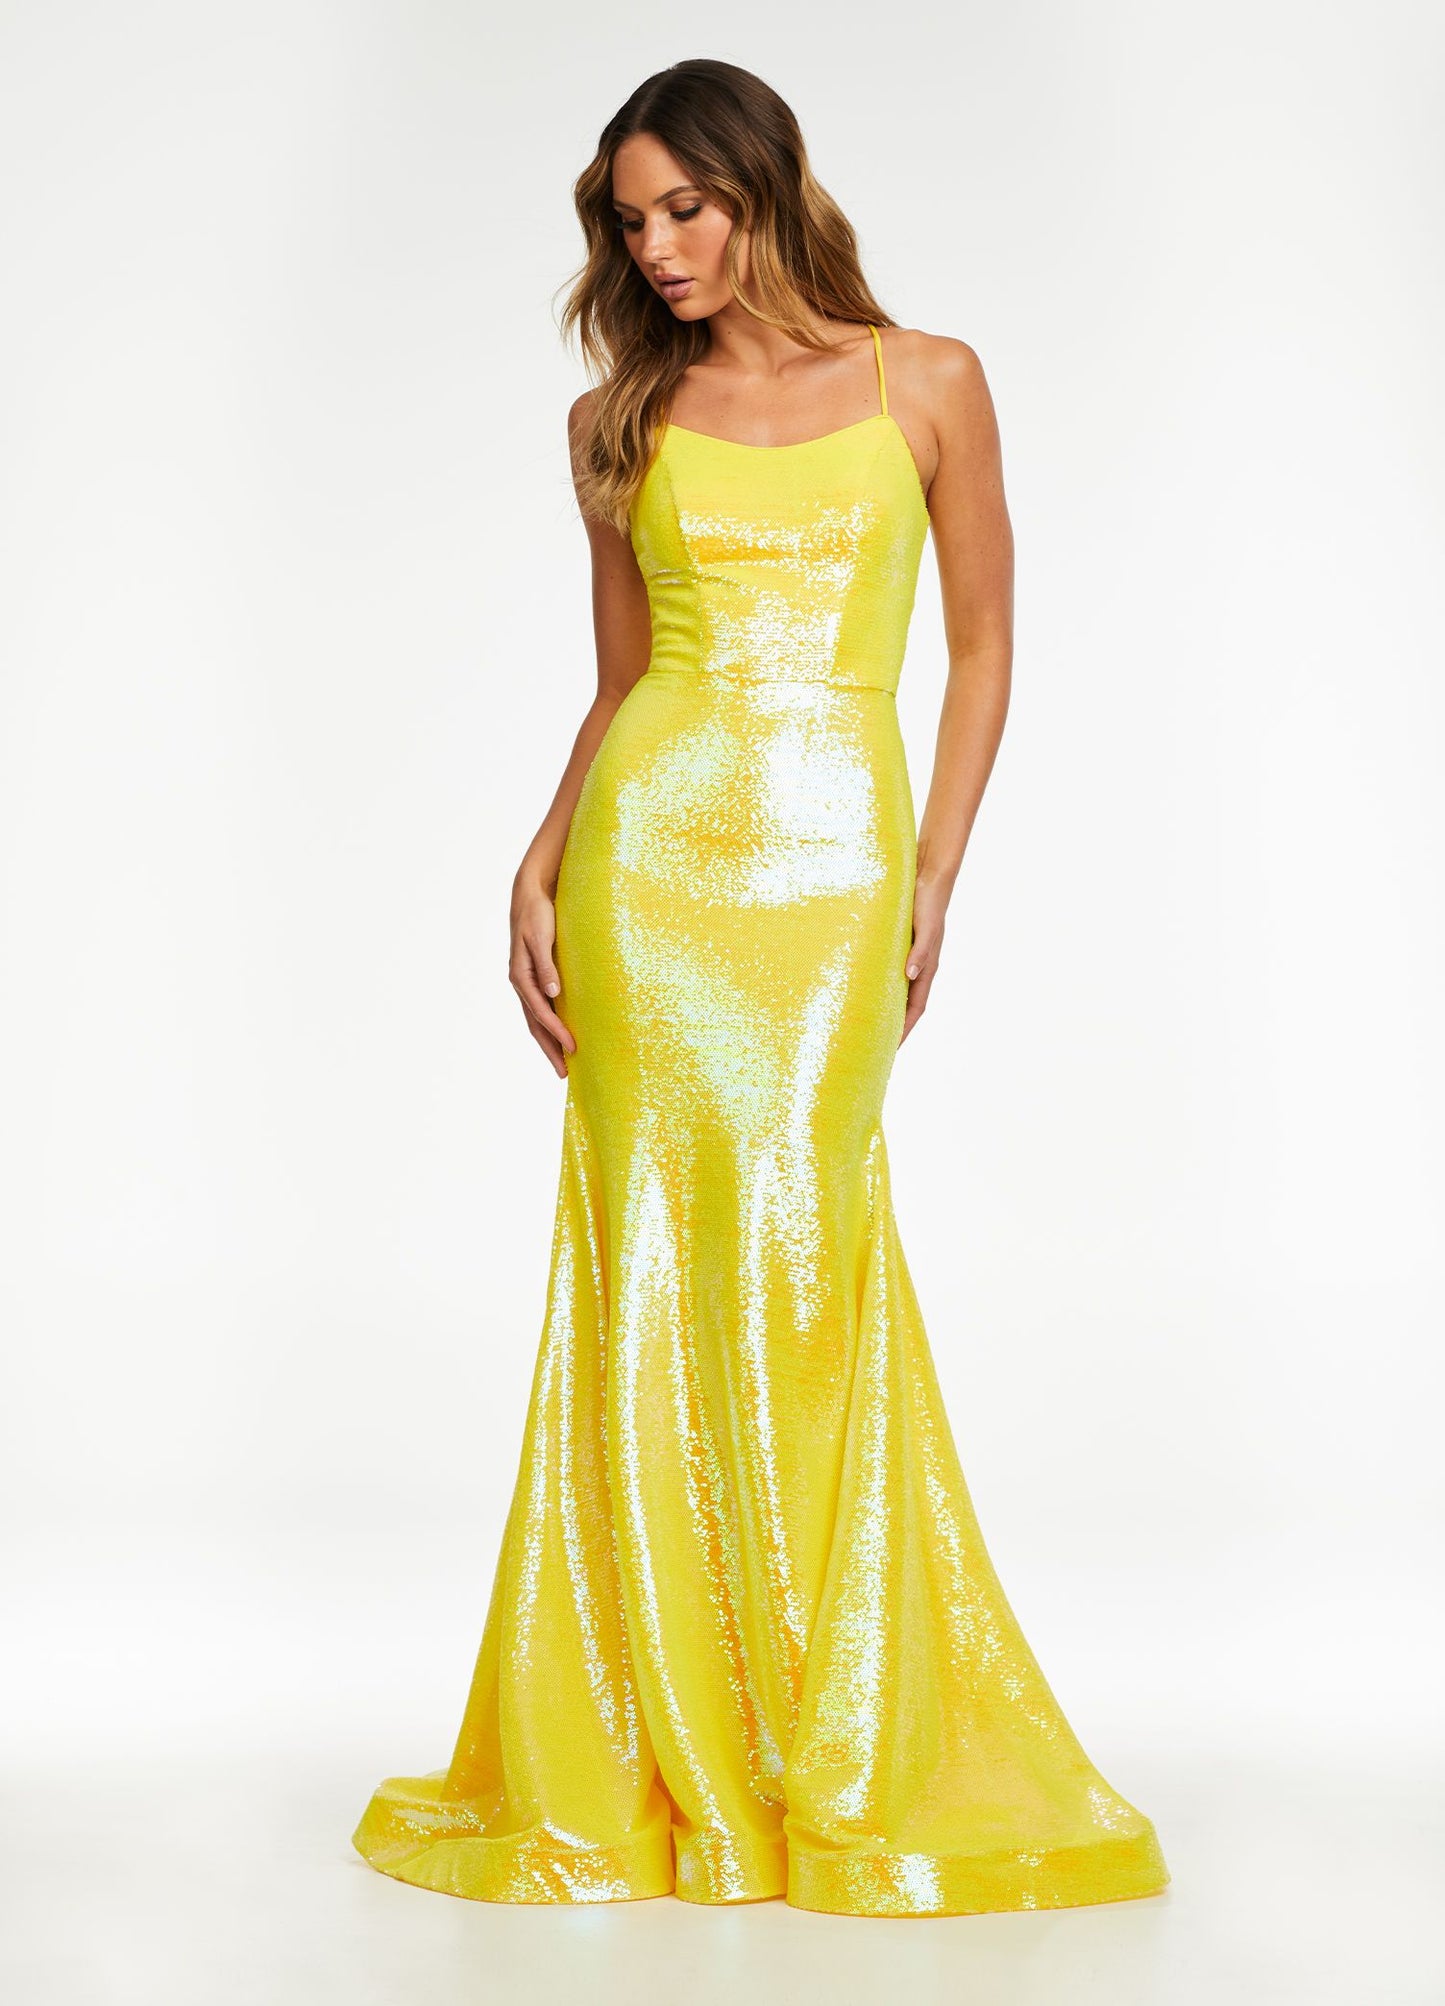 Ashley Lauren 11024 This is a neon sequin prom dress featuring a scoop neckline giving way to fitted skirt with train. The long mermaid pageant gown is complete with an open corset lace up back. Prom, Pageant and Formal Evening Wear Dresses.